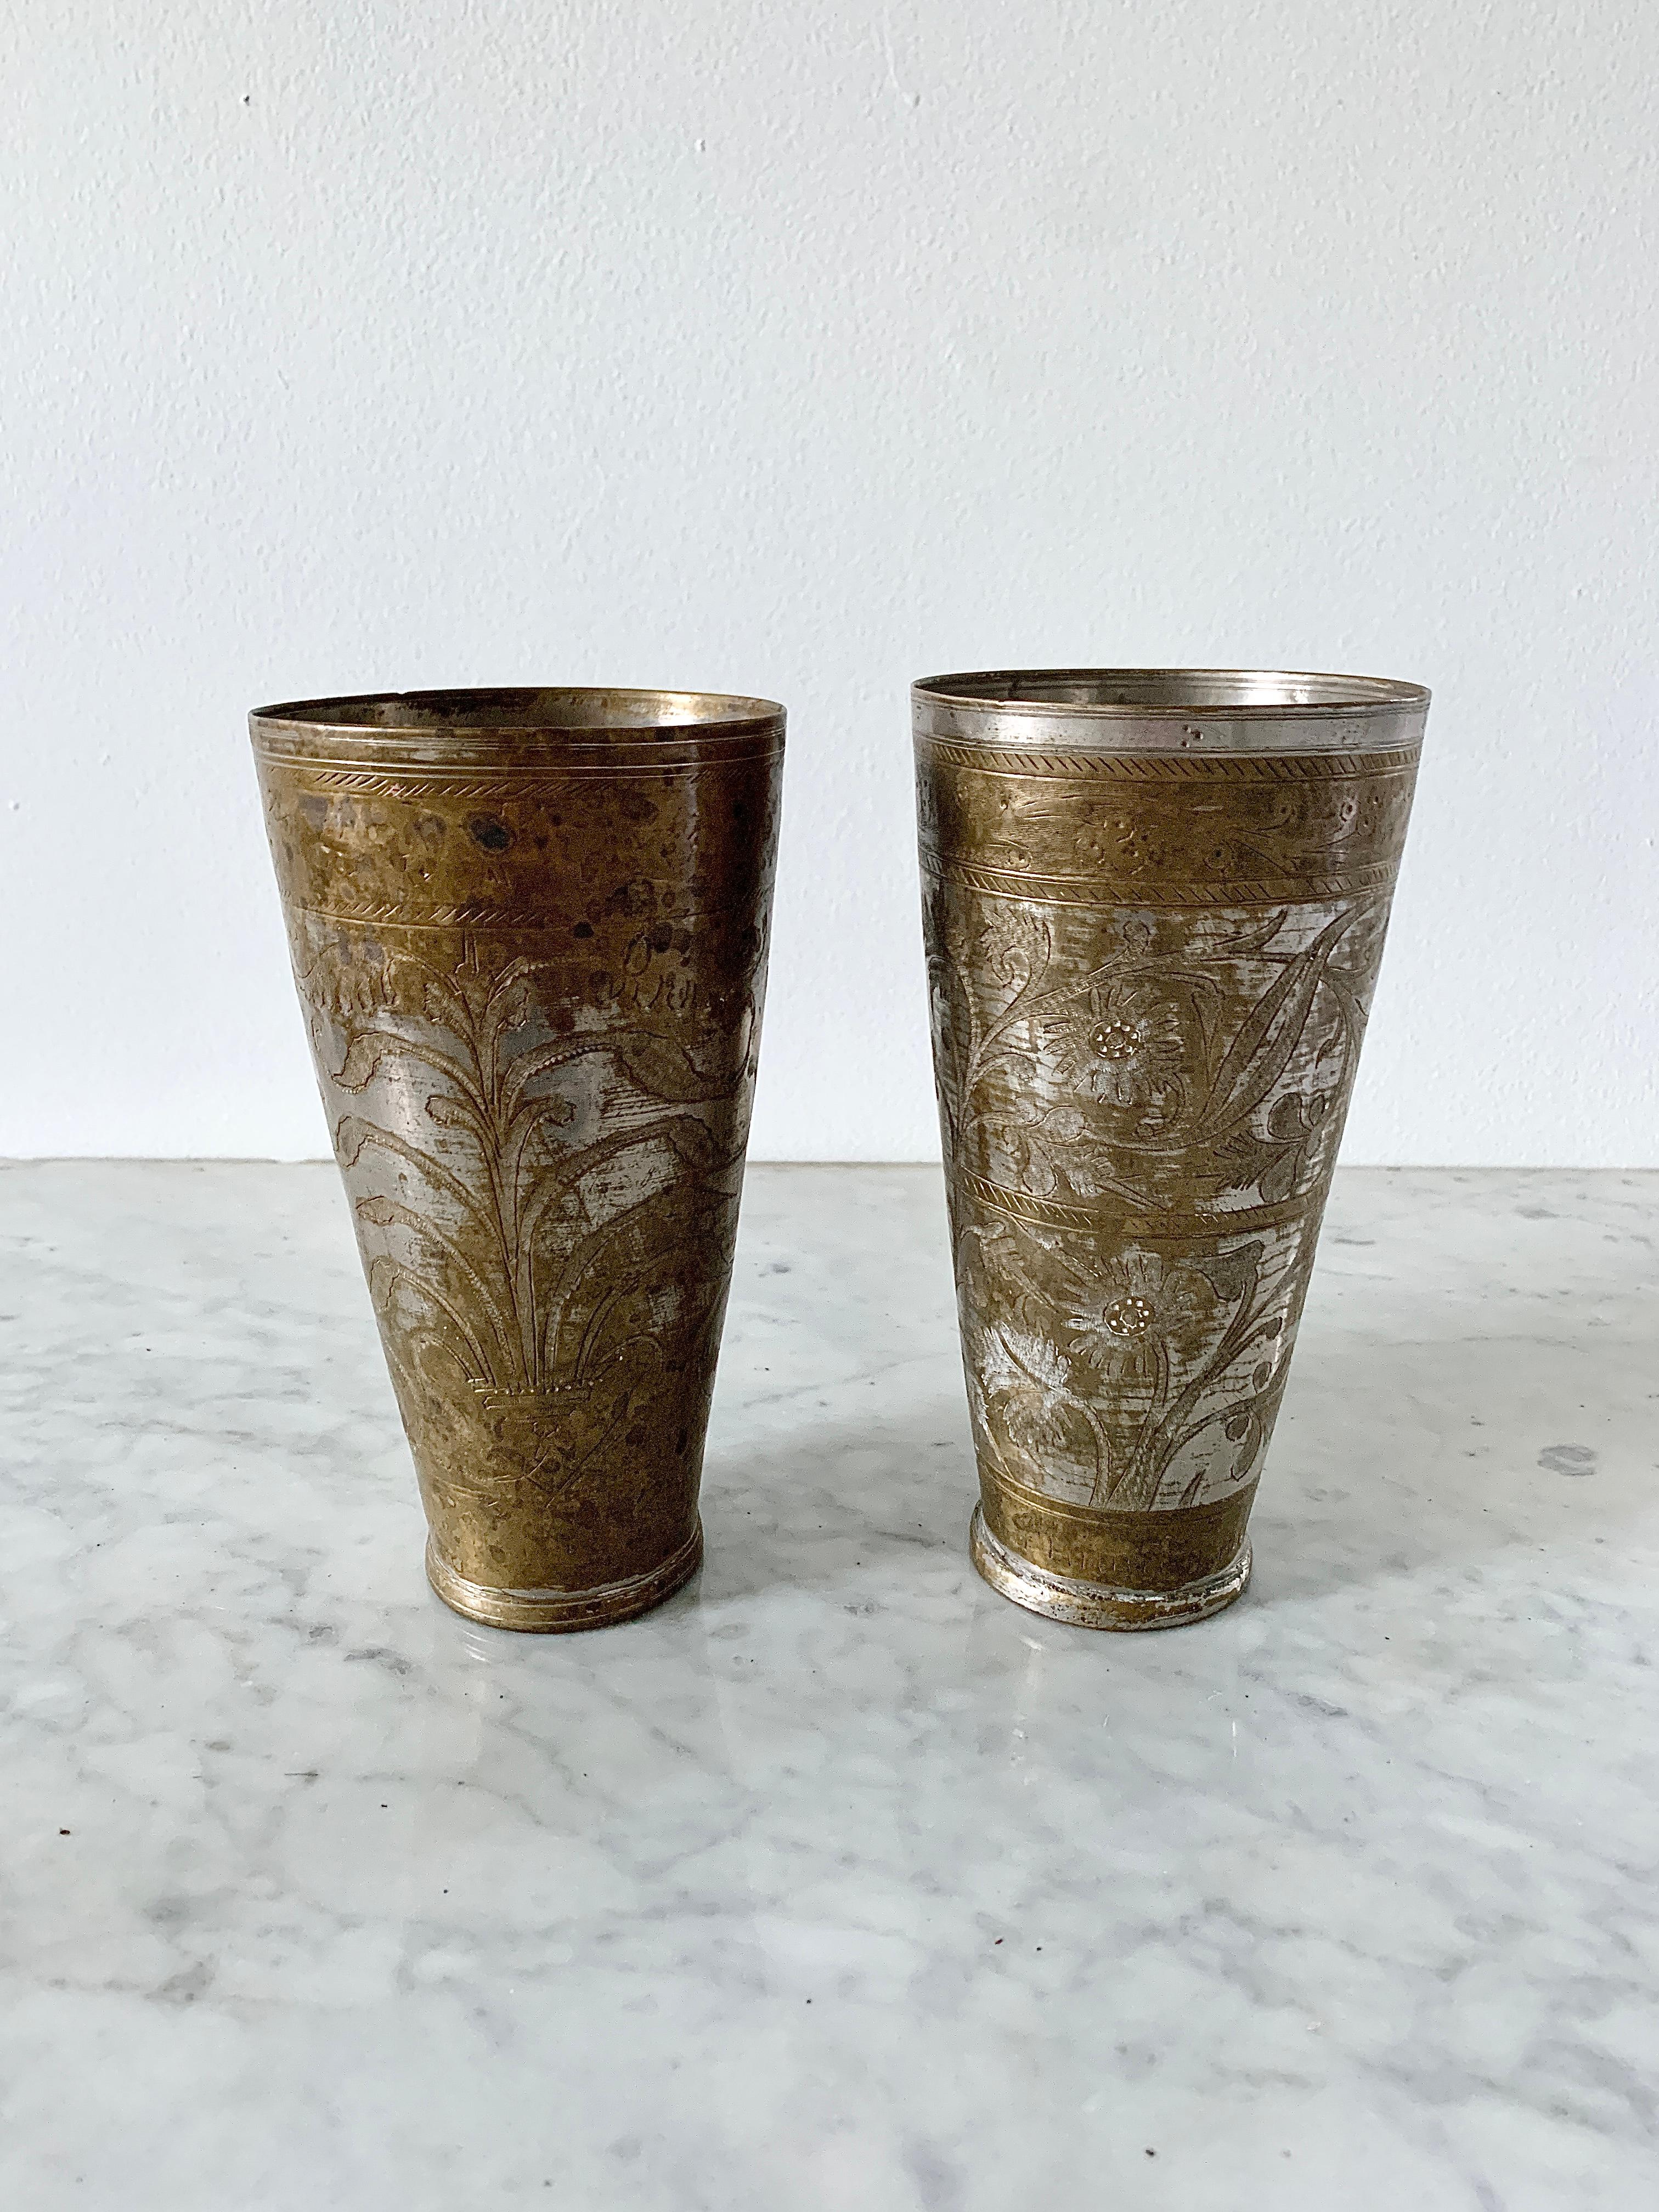 A pair of antique etched brass metal lassi cups that would make beautiful vases. Lassi is a blend of yogurt, water, spices, and sometimes fruit. For generations, lassis were served in patinated metal and brass cups in India. Hand-engraved in the